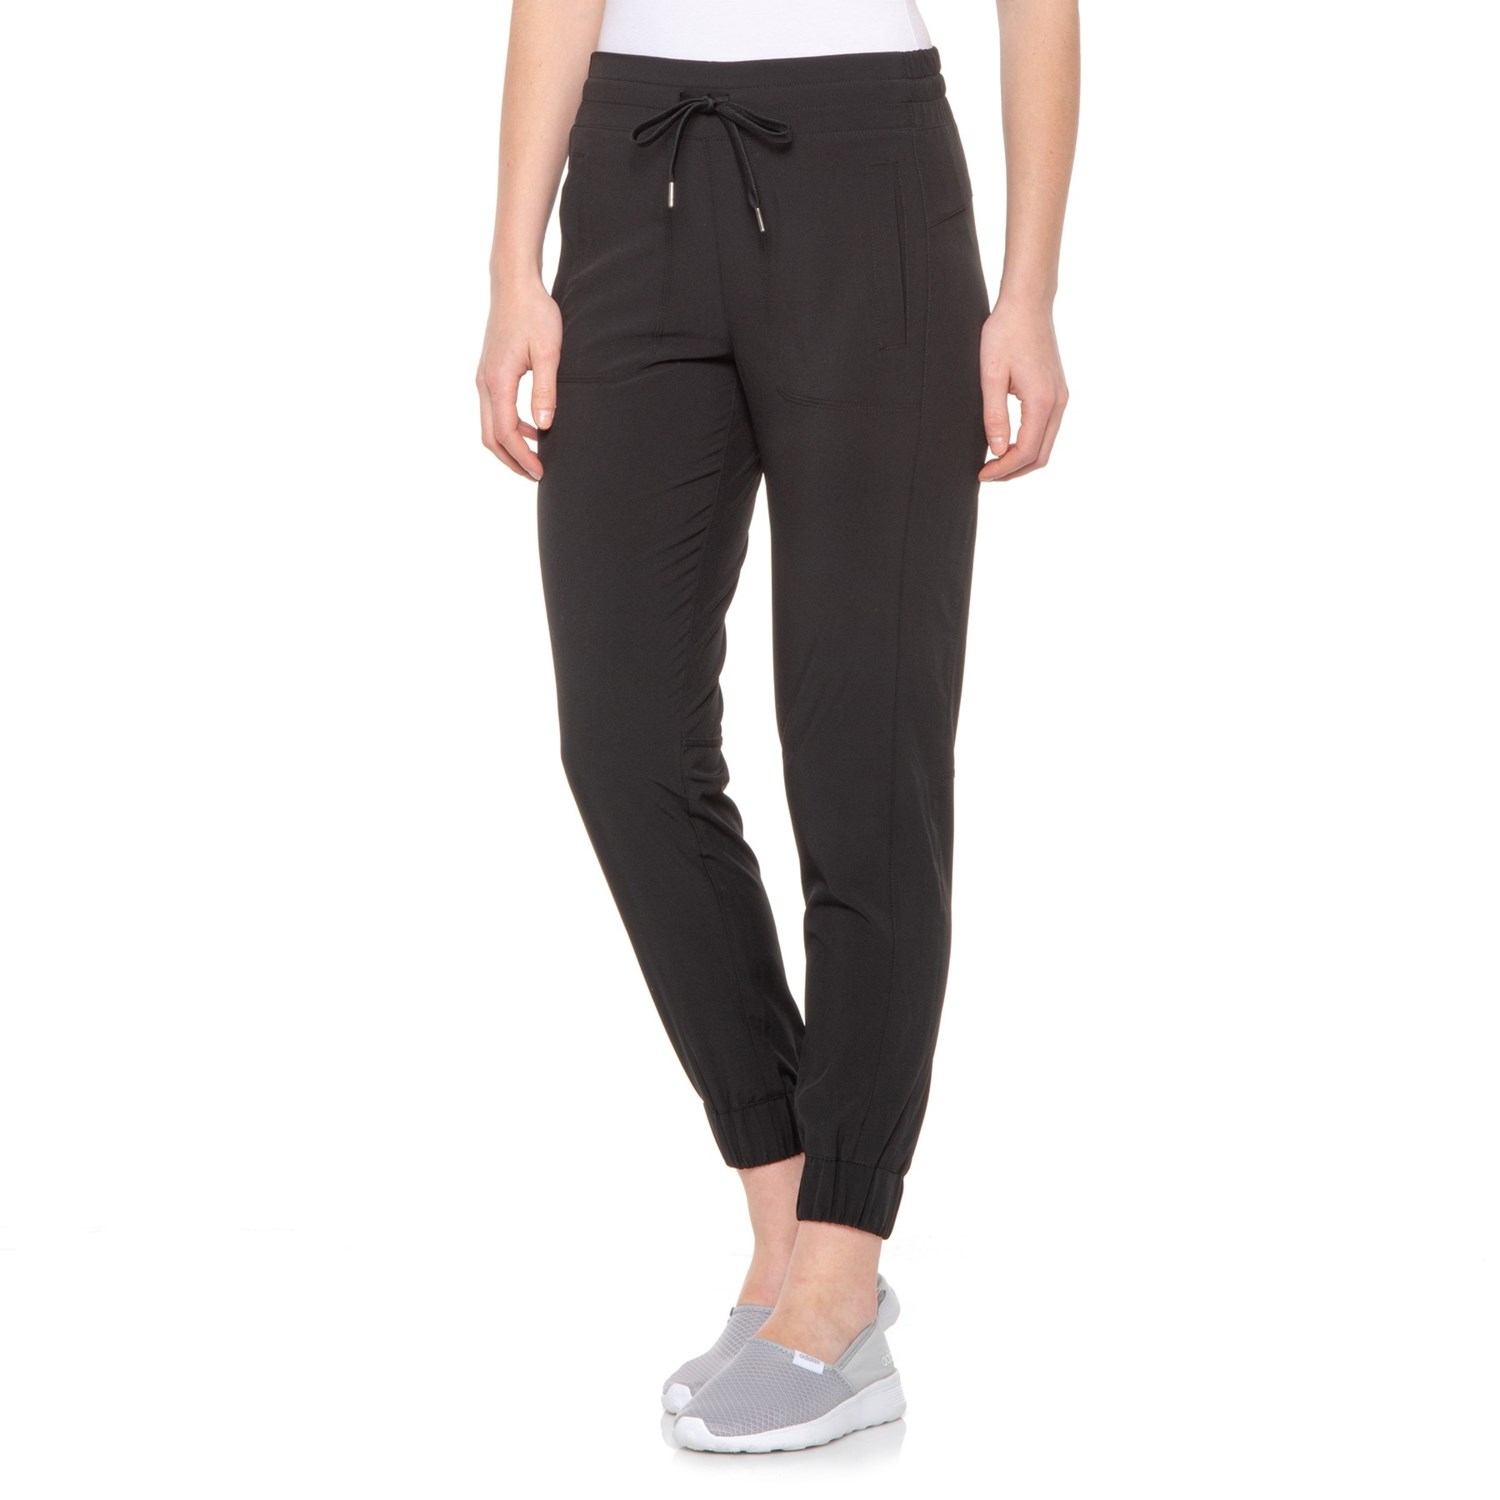 Kyodan Outdoor 4-Way Woven Pants (For Women) - Save 37%